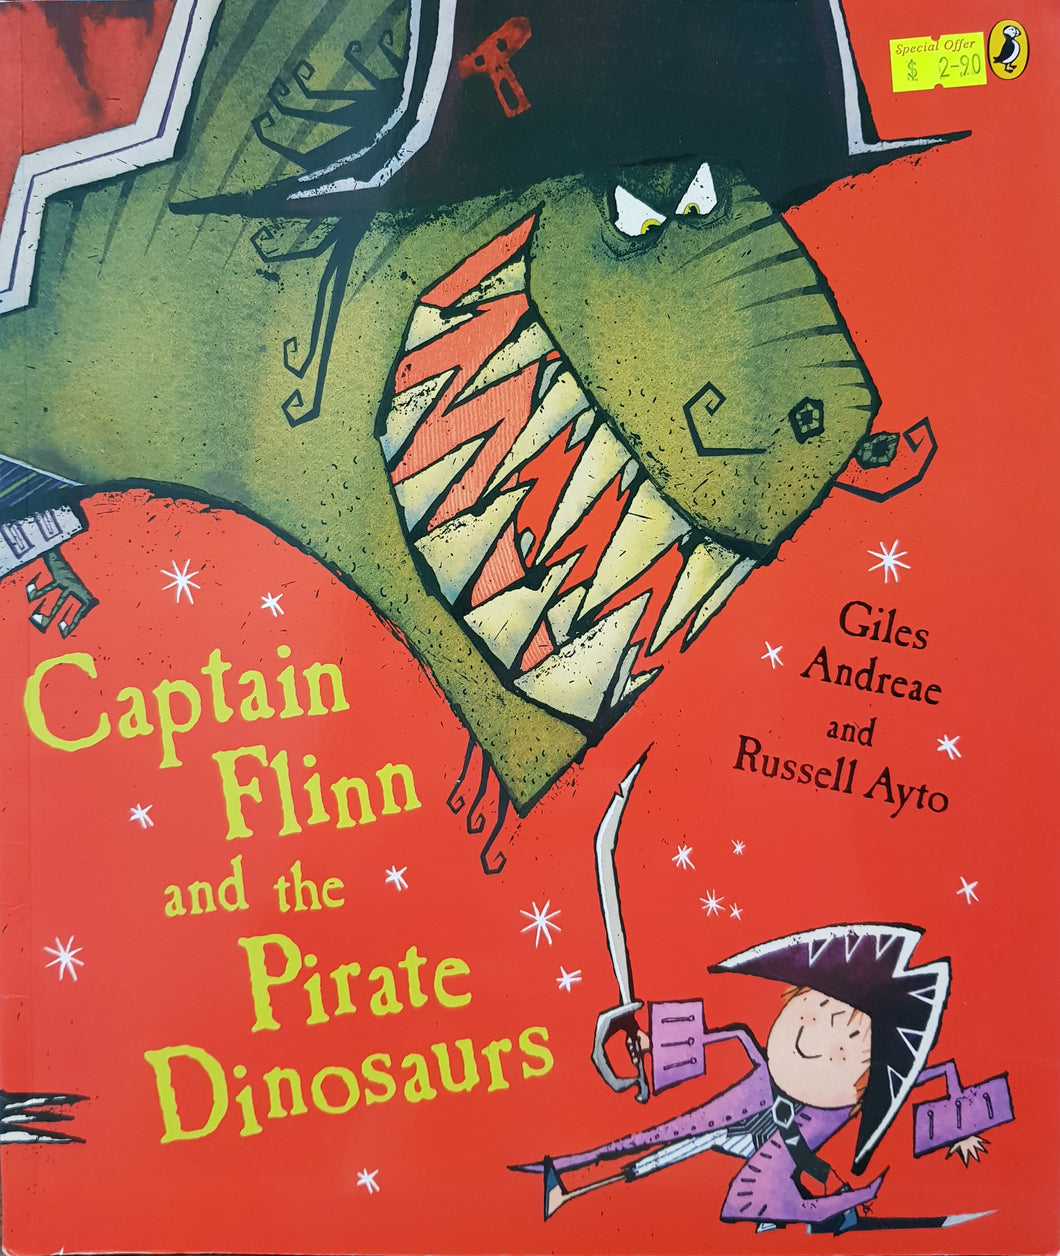 Captain Flinn and the Pirate Dinosaurs - Giles Andreae & Russell Ayto